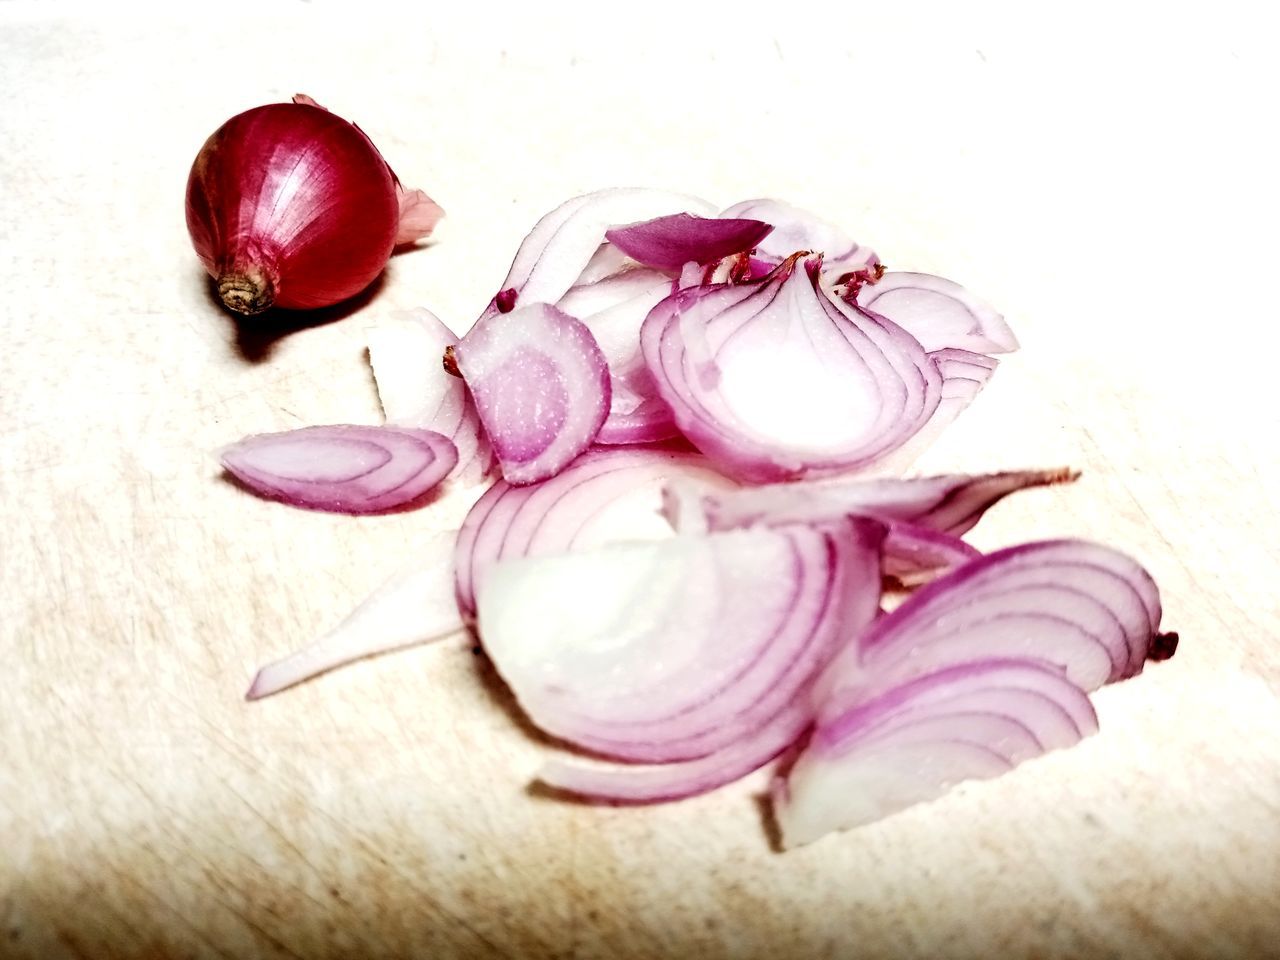 petal, food and drink, food, red onion, shallot, freshness, pink, healthy eating, onion, produce, wellbeing, flower, plant, purple, indoors, vegetable, still life, no people, close-up, ingredient, raw food, garlic, fruit, radish, table, studio shot, organic, high angle view, spanish onion